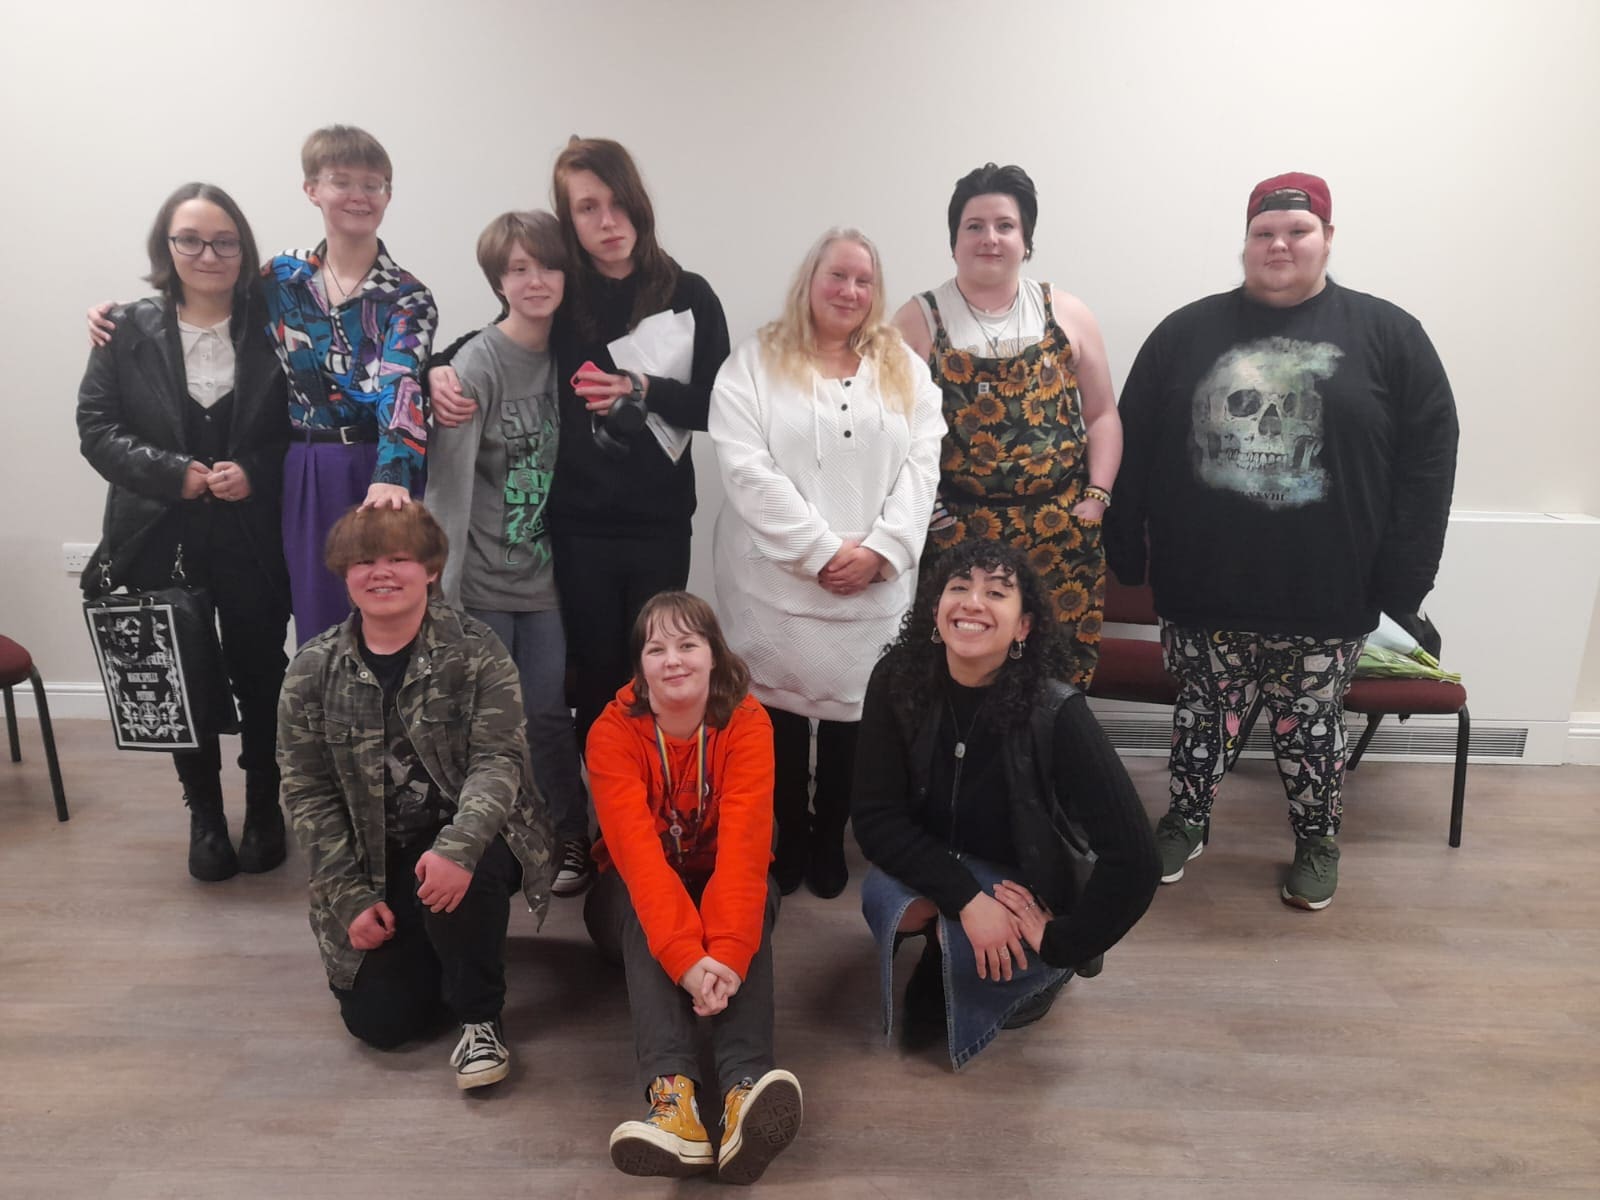 Pride Action North inspires reunion for TYA’s young people